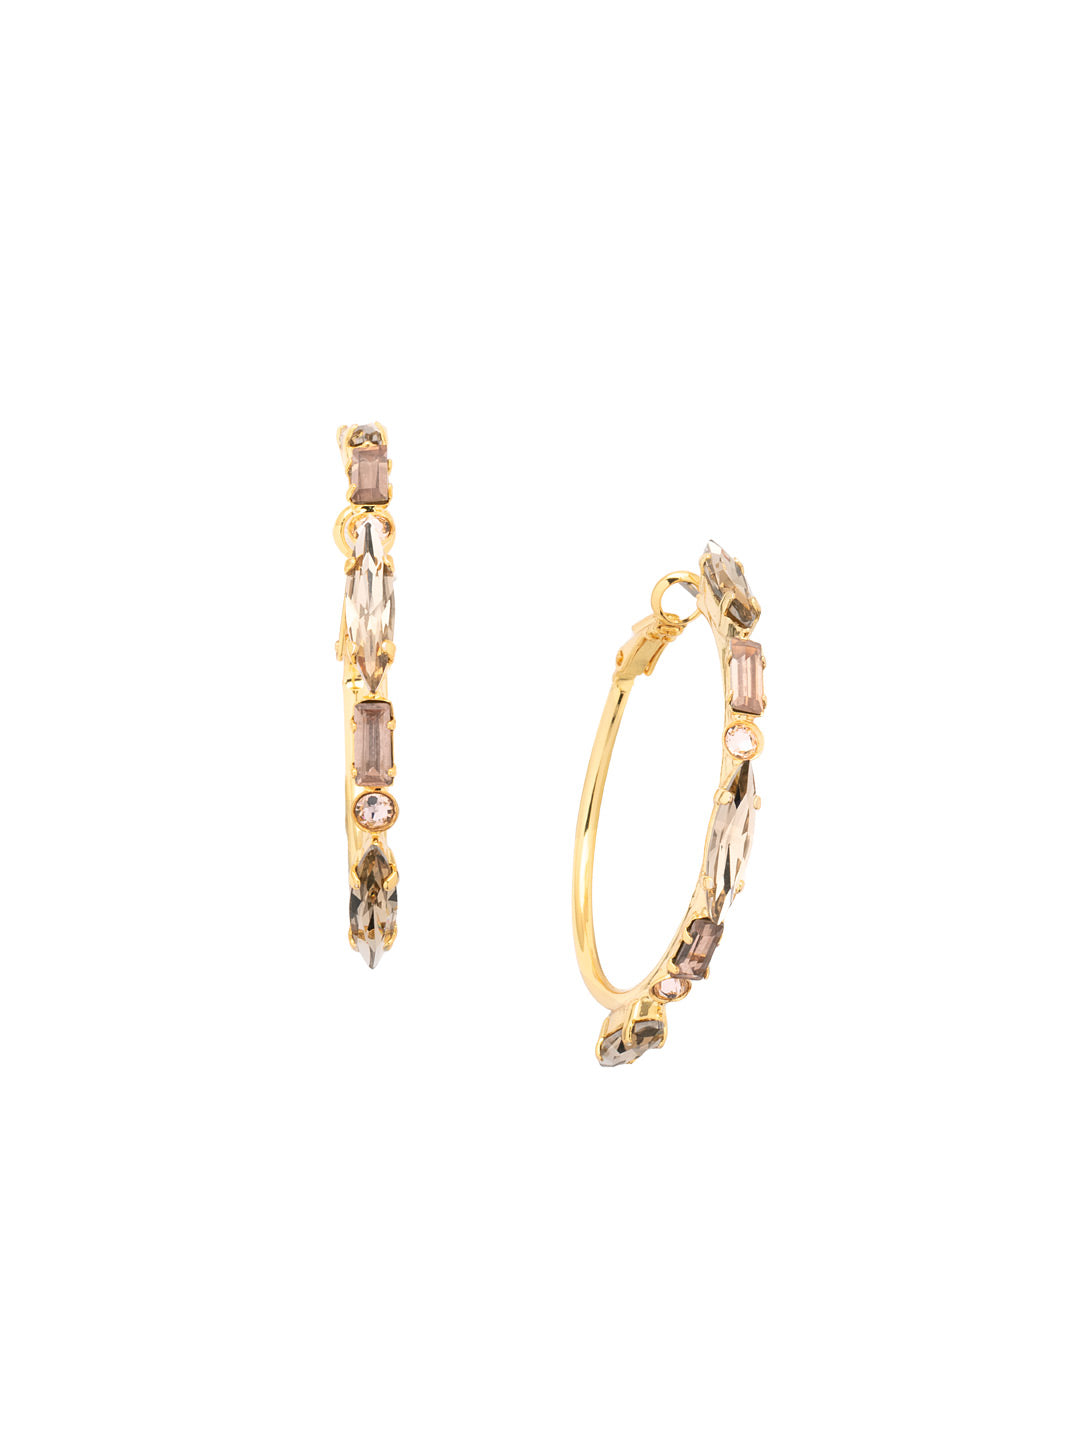 Emory Hoop Earring - EFC21BGRSU - <p>The Emory Hoop Earrings feature a line of baguette, round, and emerald cut crystals on a classic metal hoop. From Sorrelli's Raw Sugar collection in our Bright Gold-tone finish.</p>